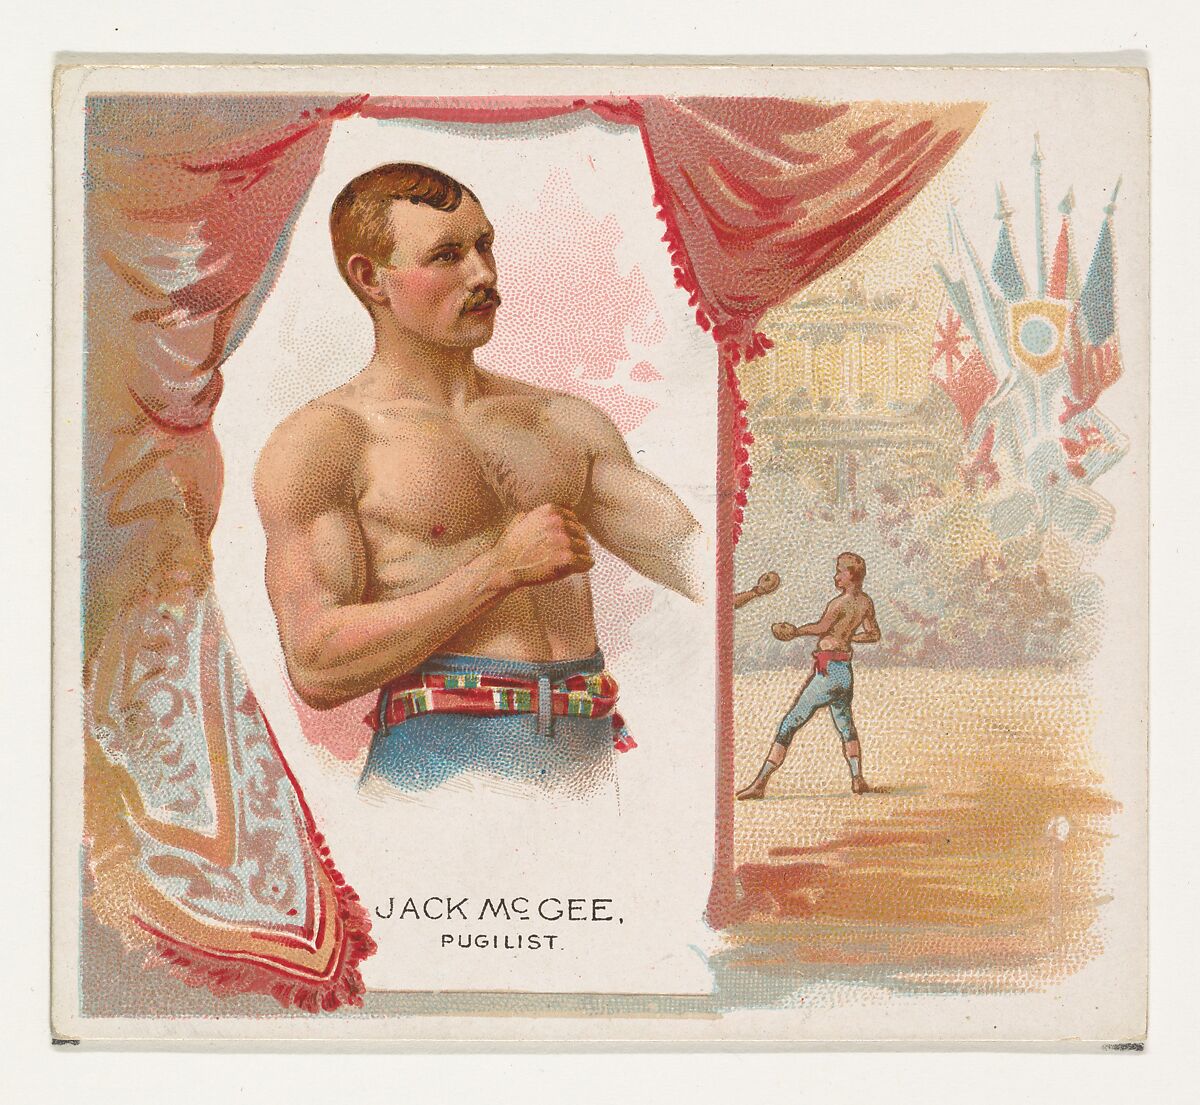 Jack McGee, Pugilist, from World's Champions, Second Series (N43) for Allen & Ginter Cigarettes, Allen &amp; Ginter (American, Richmond, Virginia), Commercial lithograph 